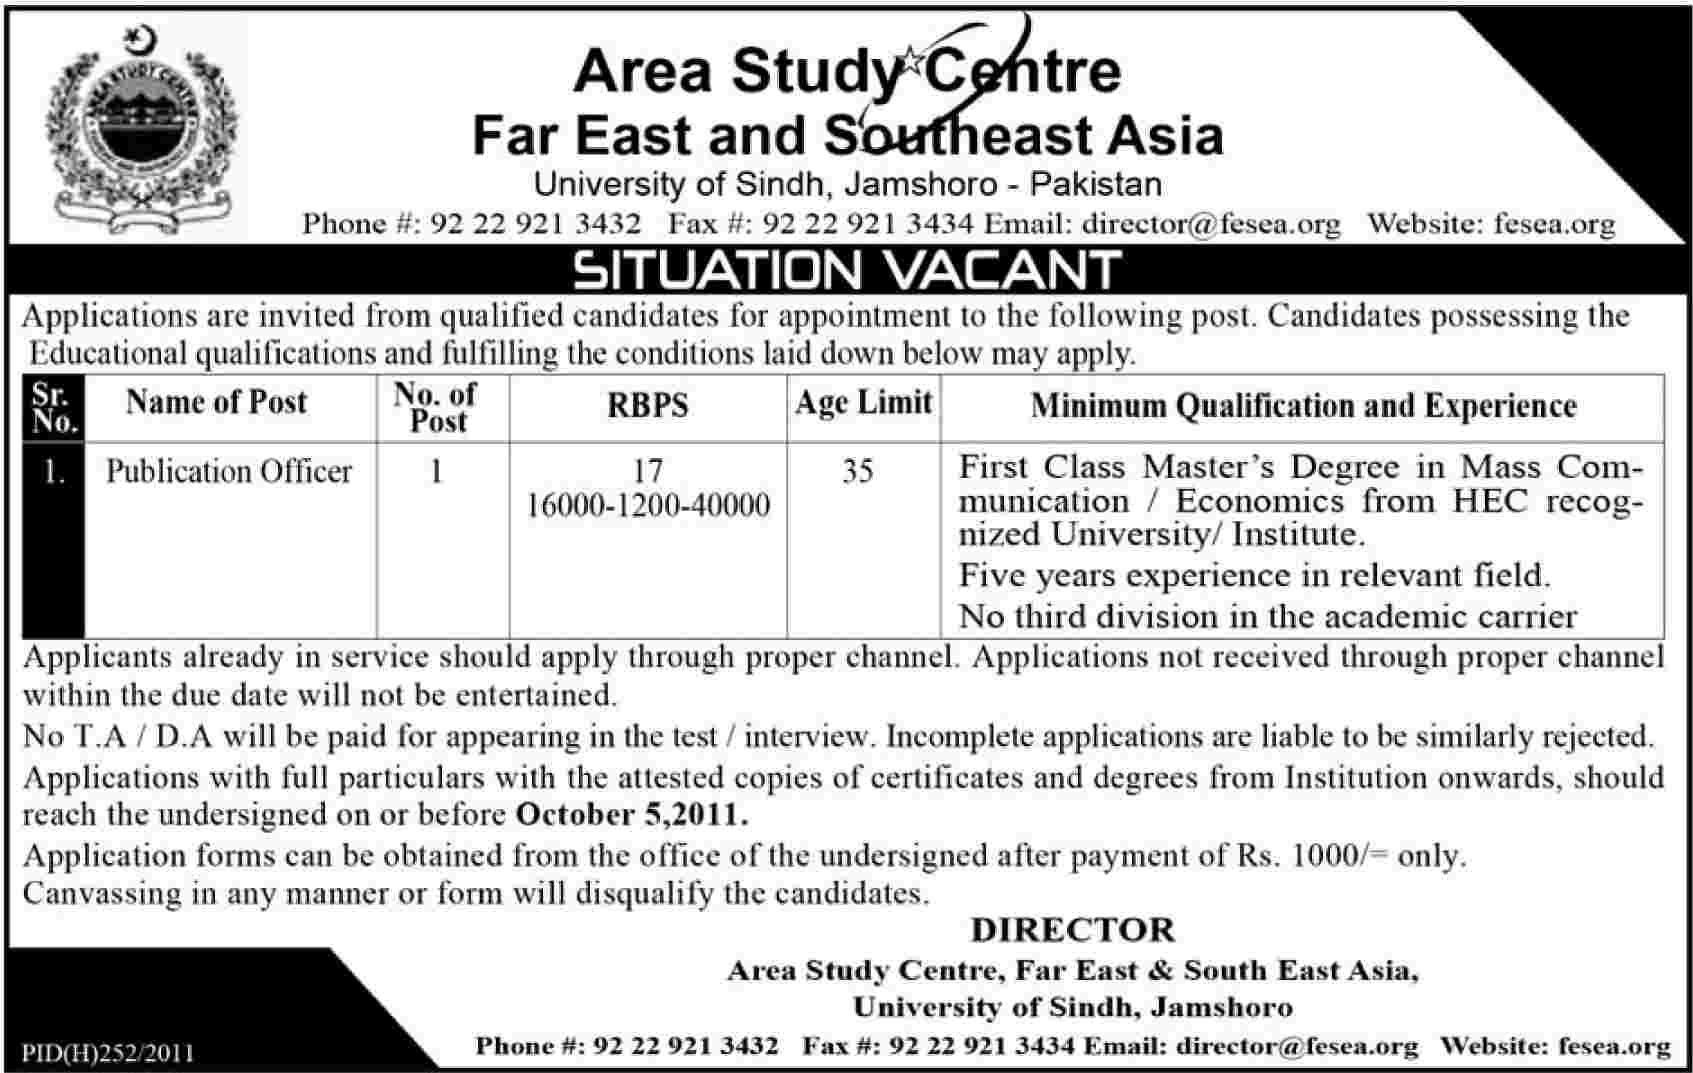 Publication Officer Required by Area Study Centre Far East and Southeast Asia